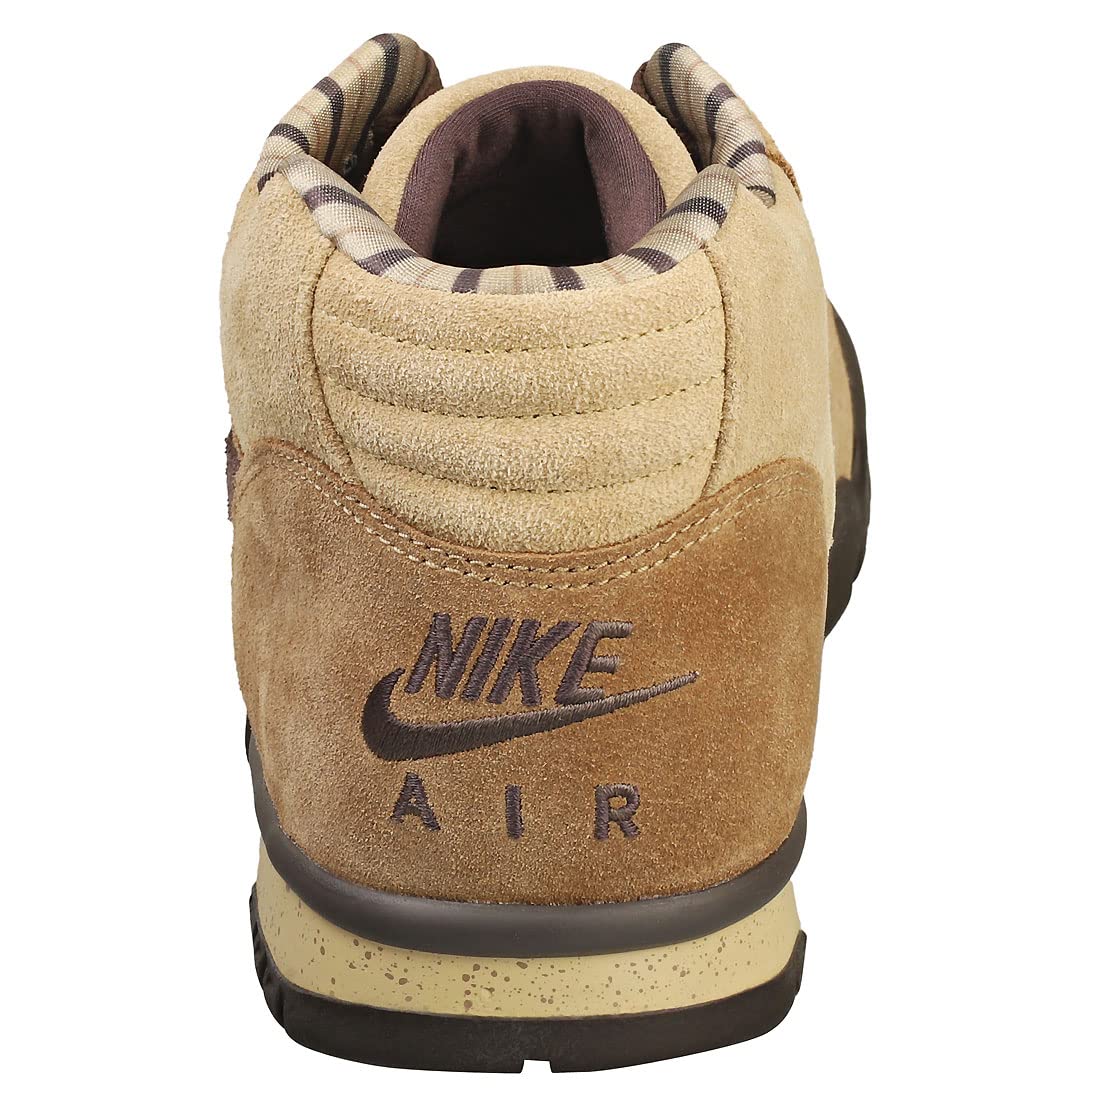 Nike Air Trainer 1 Size-10 M US